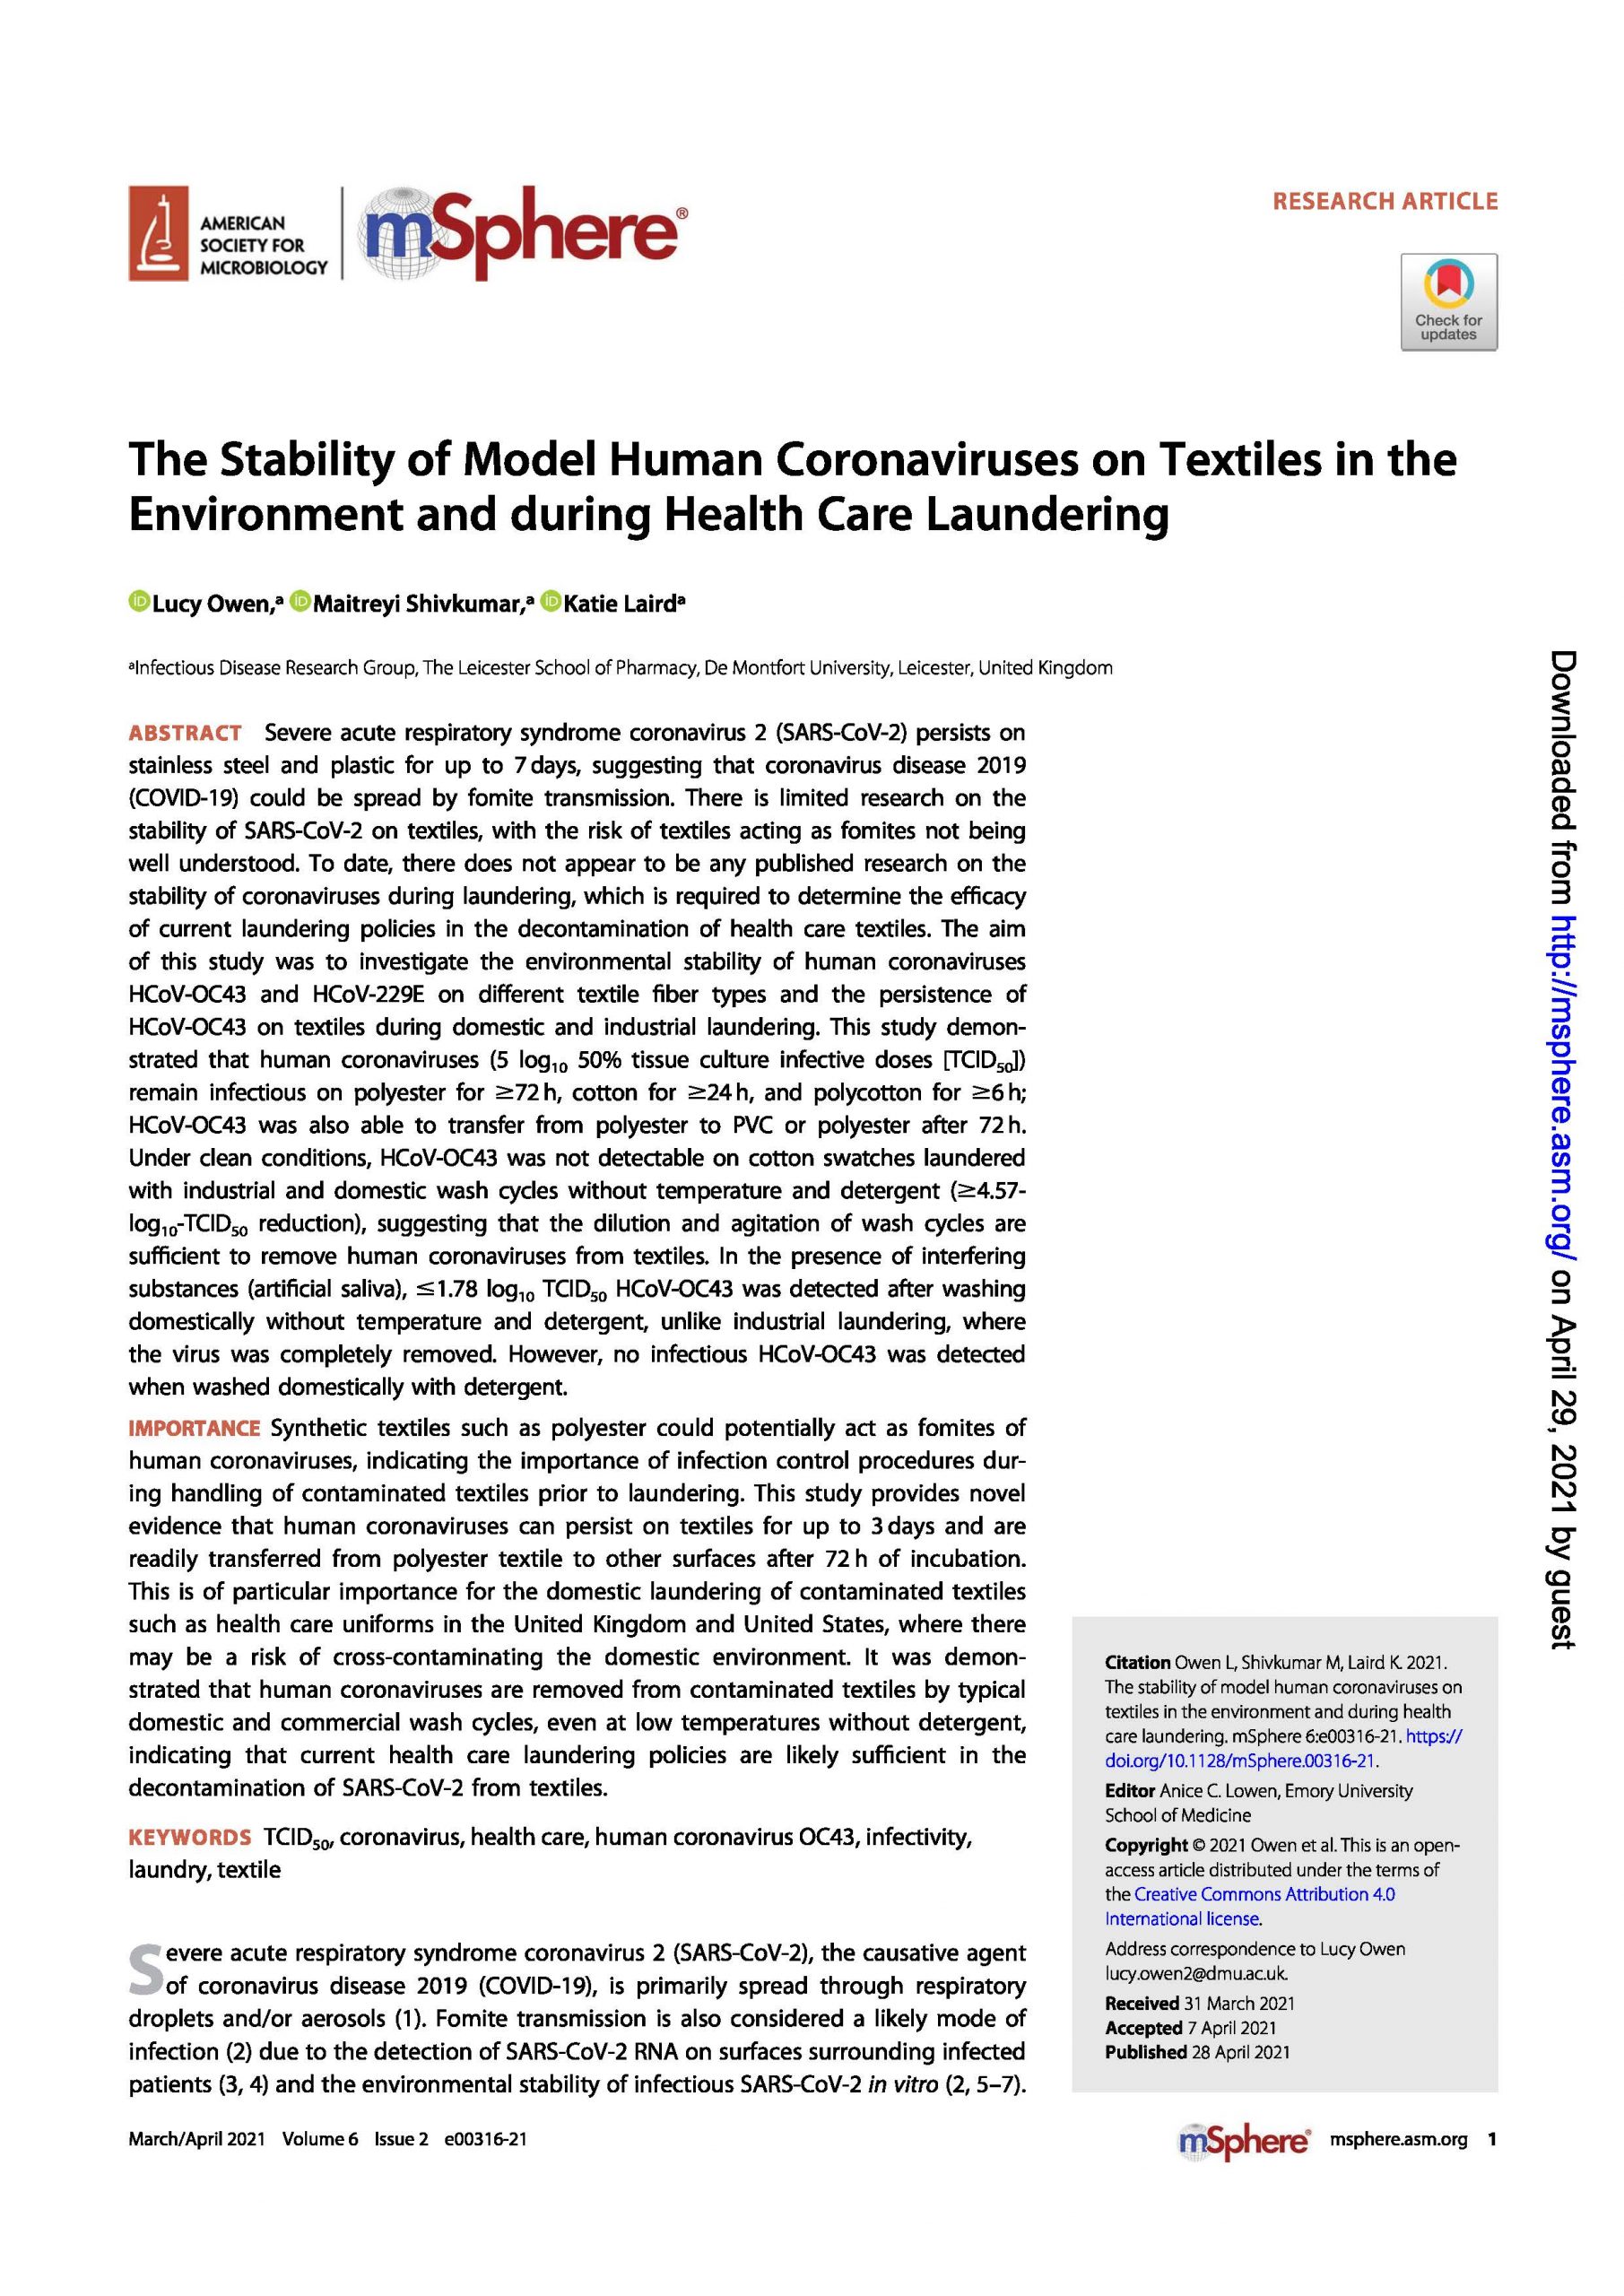 The Stability of Model Human Coronaviruses on Textiles in the Environment and during Health Care Laundering